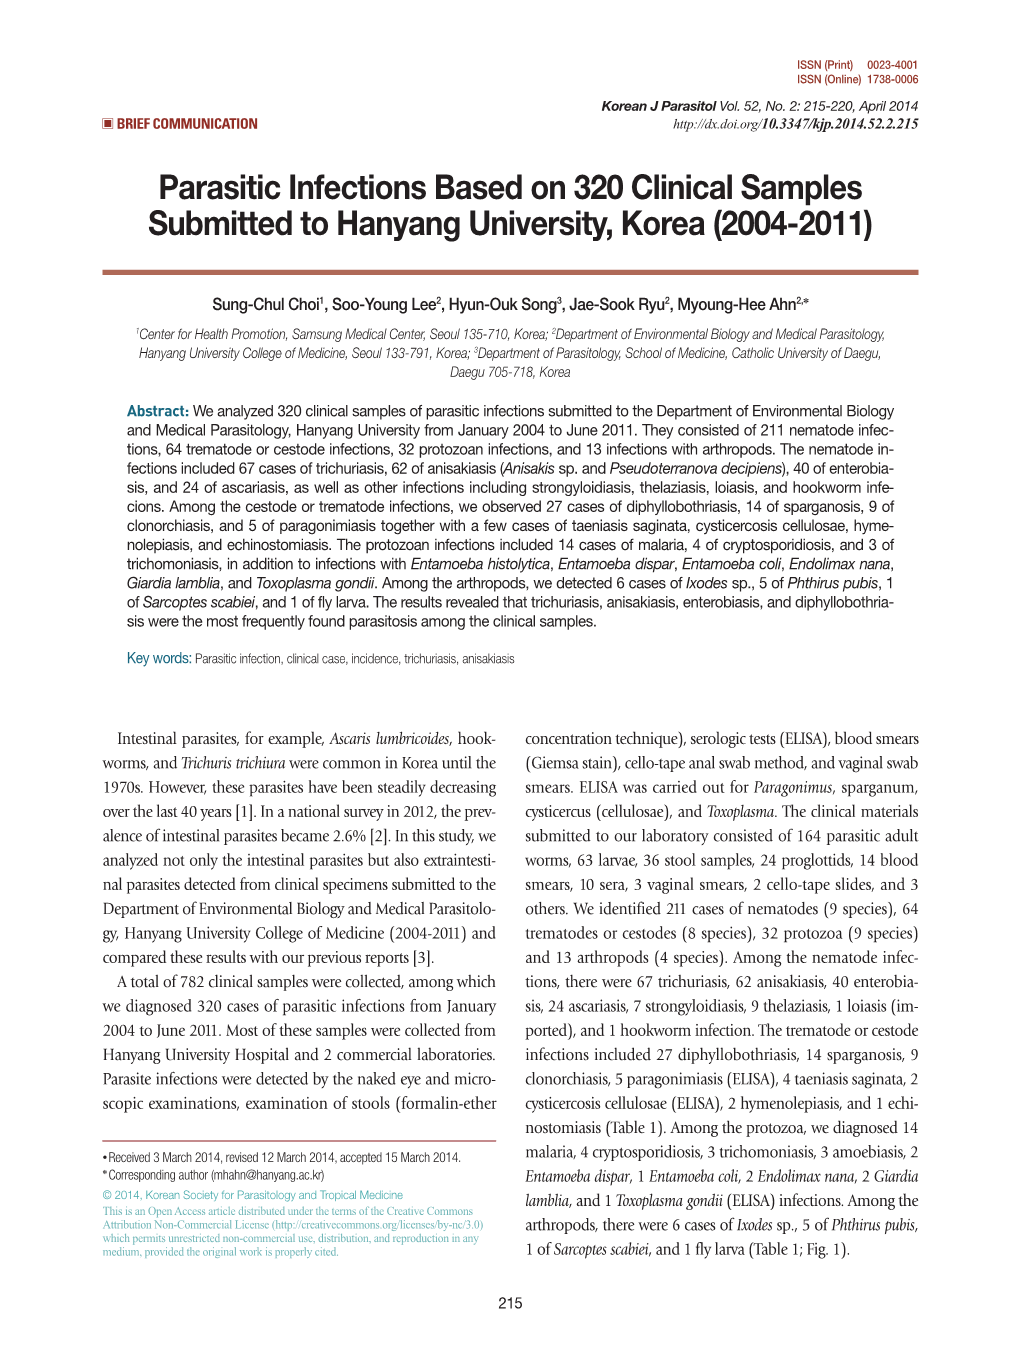 Parasitic Infections Based on 320 Clinical Samples Submitted to Hanyang University, Korea (2004-2011)